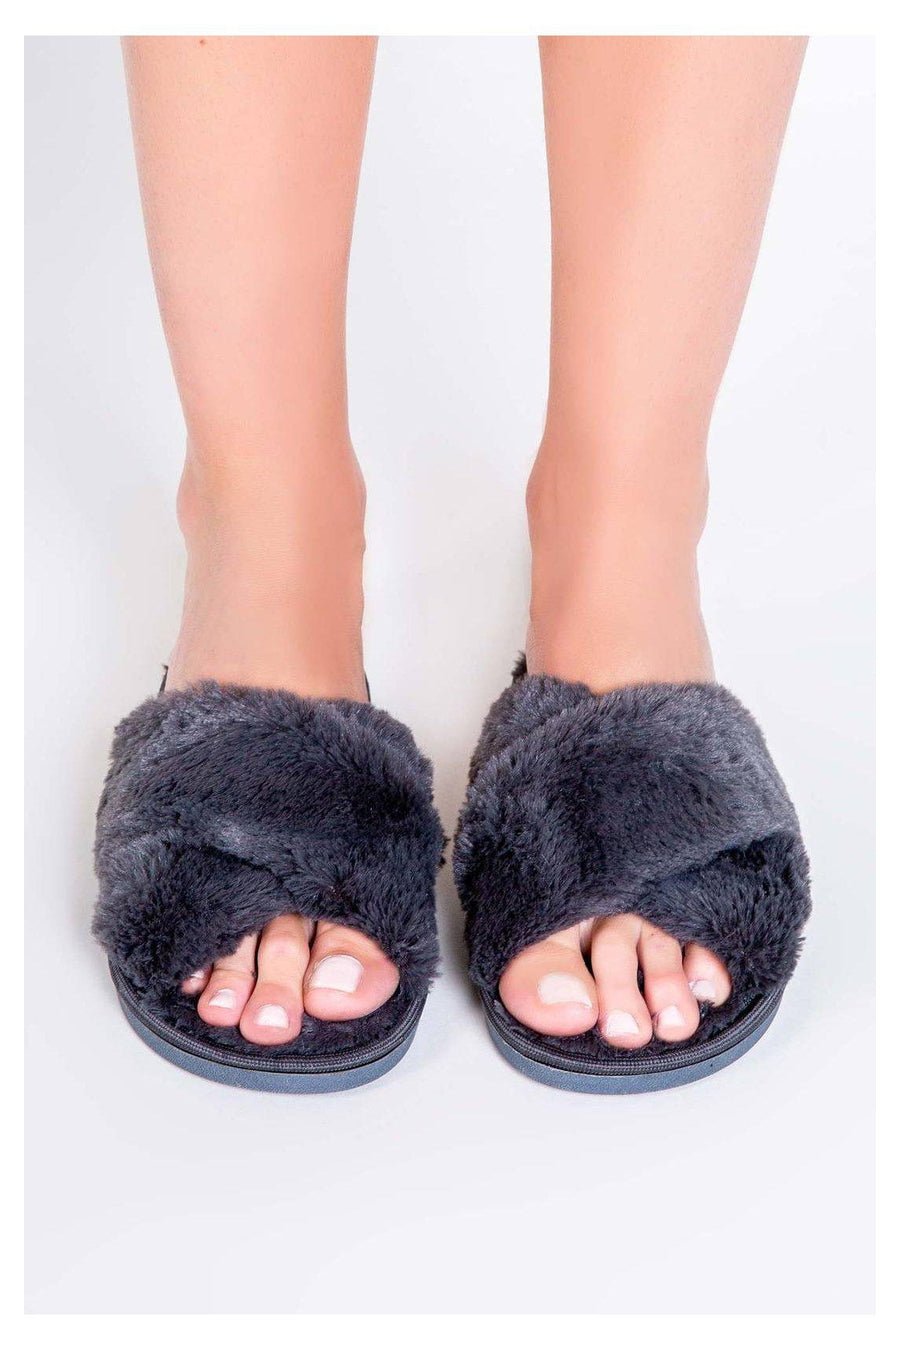 Shop PJ Salvage Faux Fur Slipper Slides - Premium Slippers from PJ Salvage Online now at Spoiled Brat 